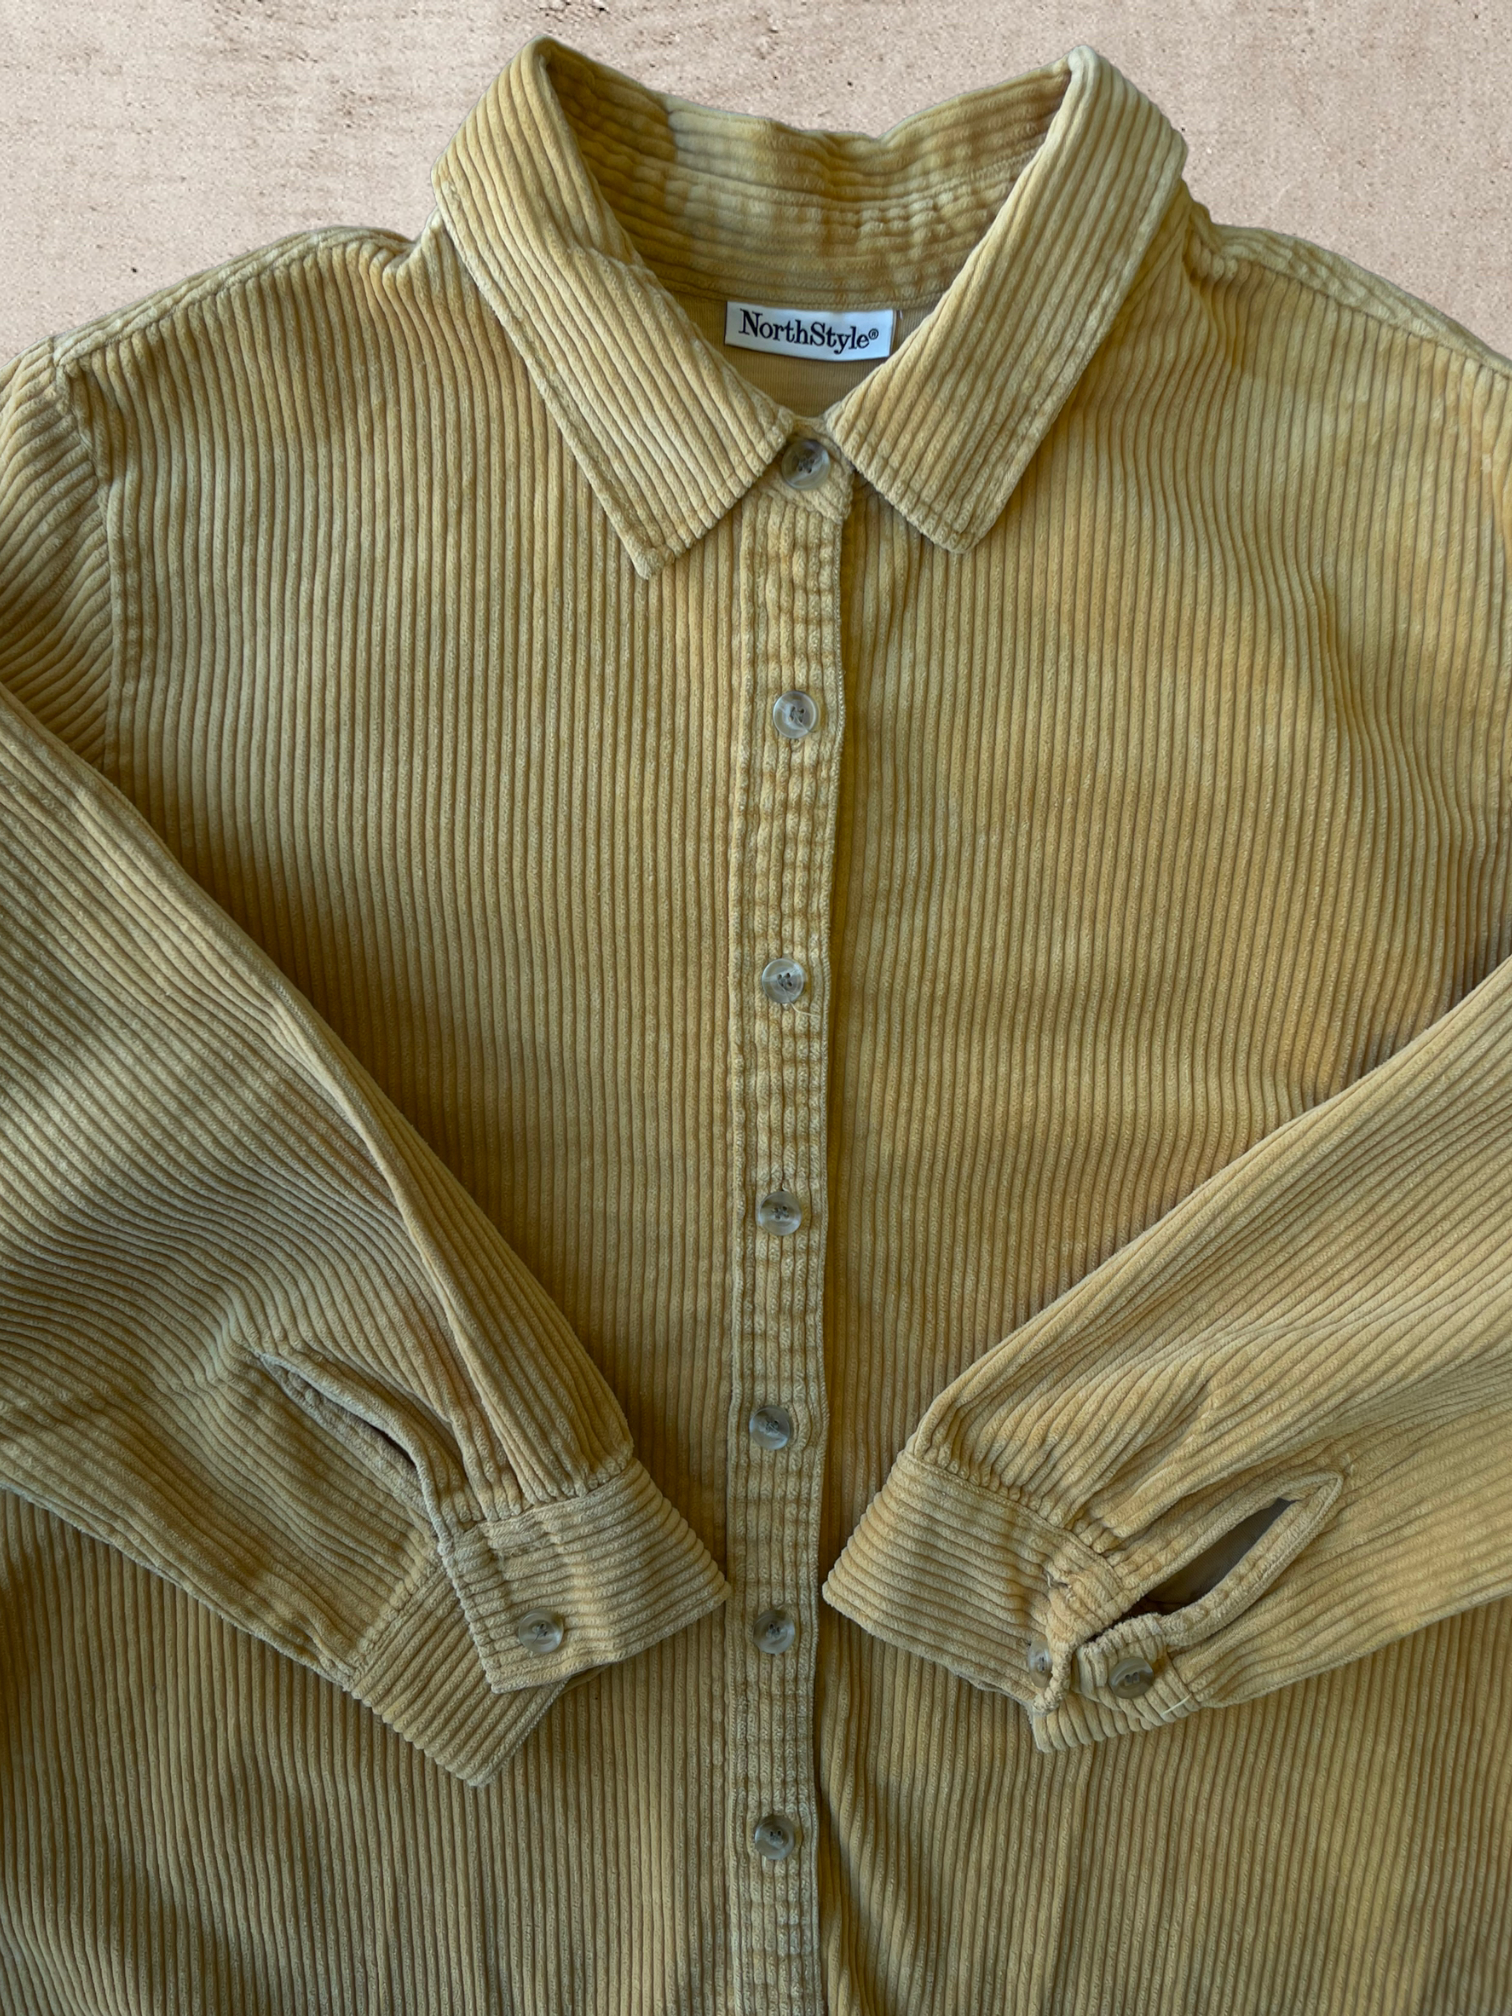 90s Corduroy Button Up - X-Large